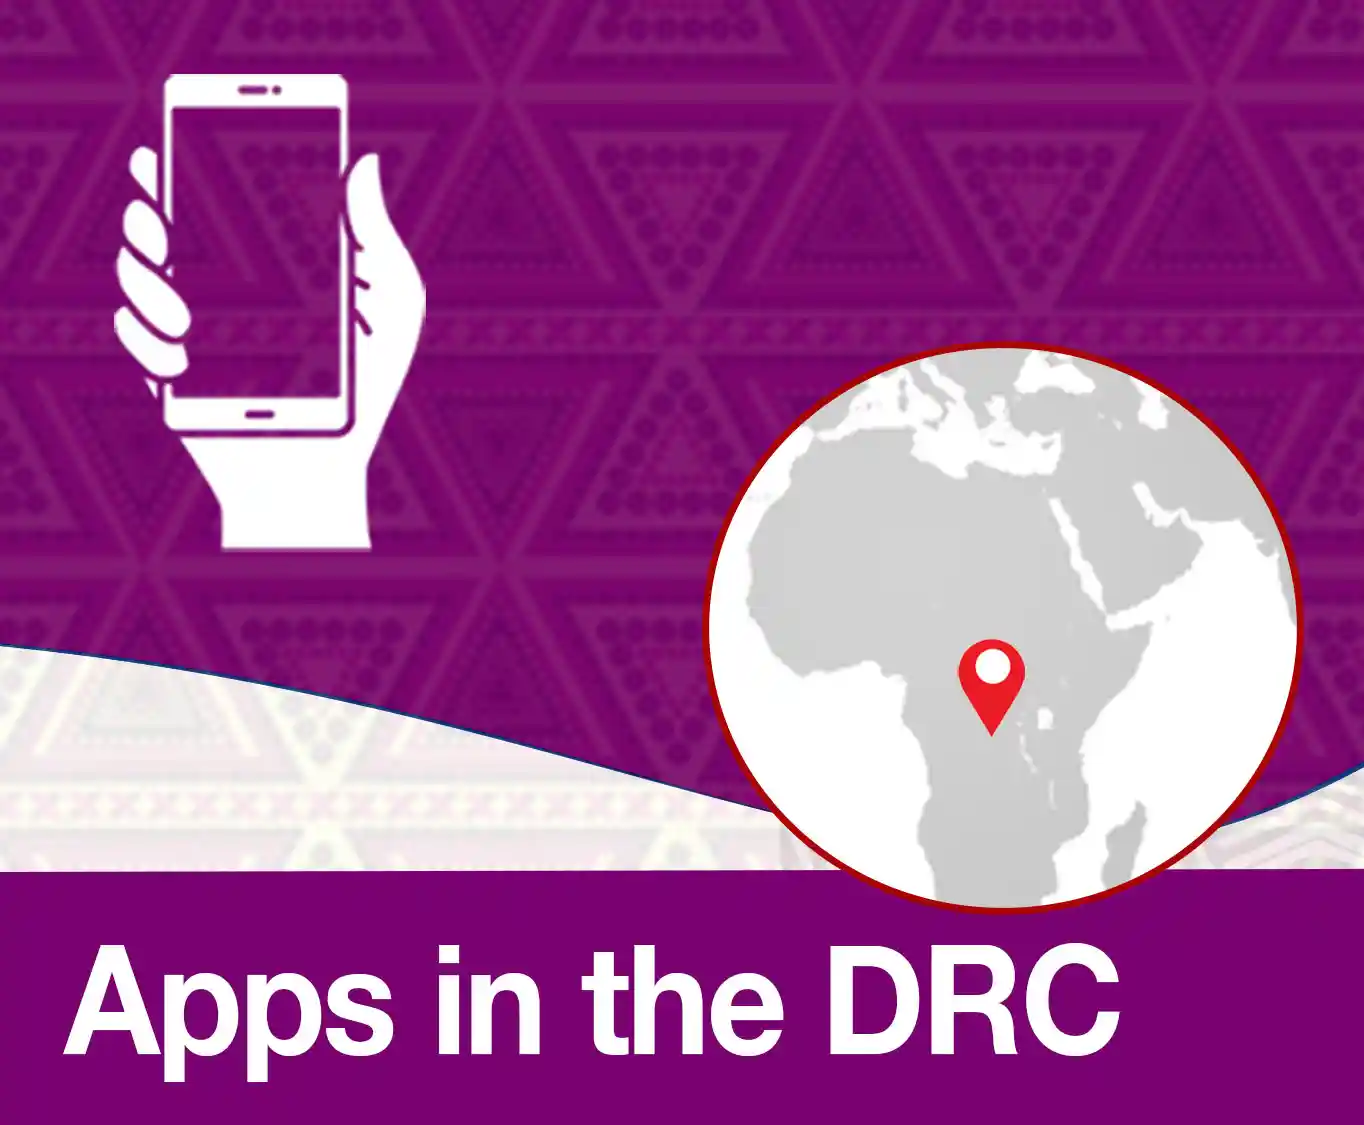 Apps in the DRC